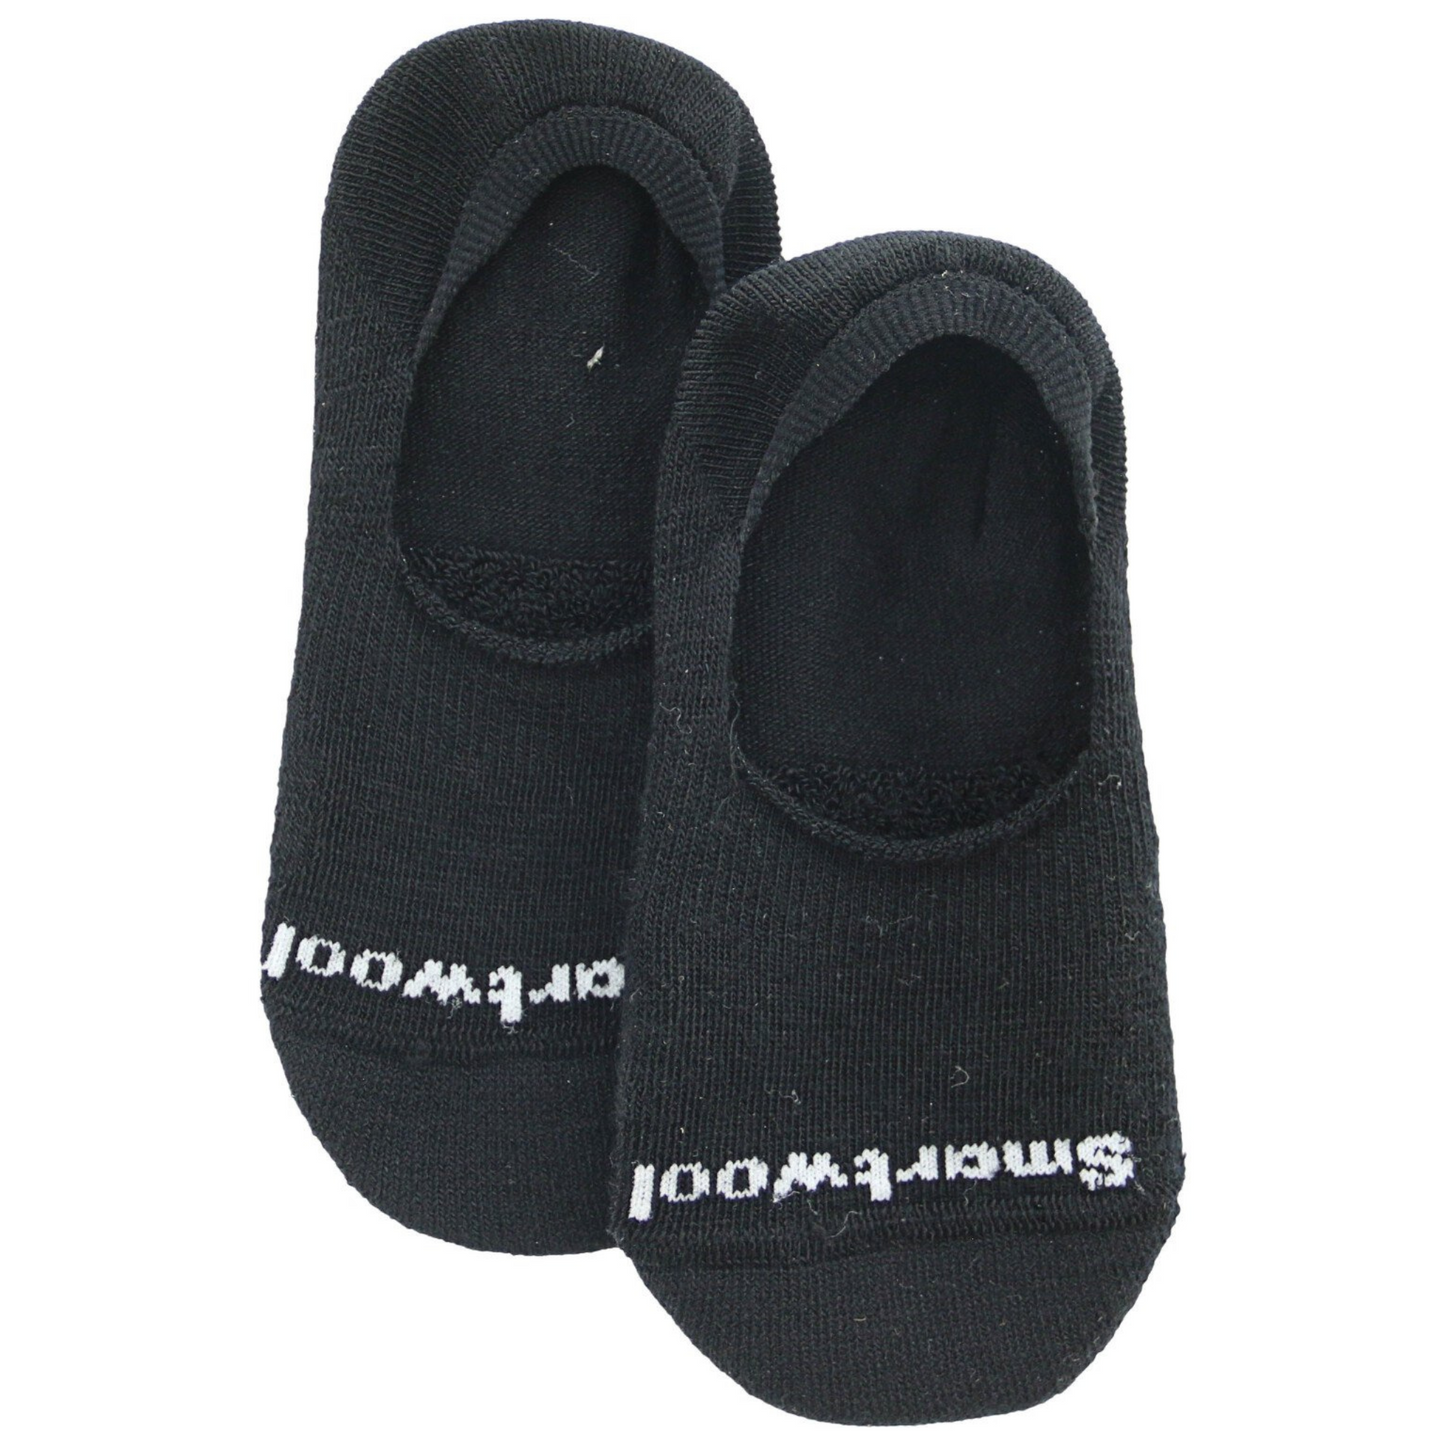 A photo of a black pair of no show socks with a white smartwool logo across the toe.